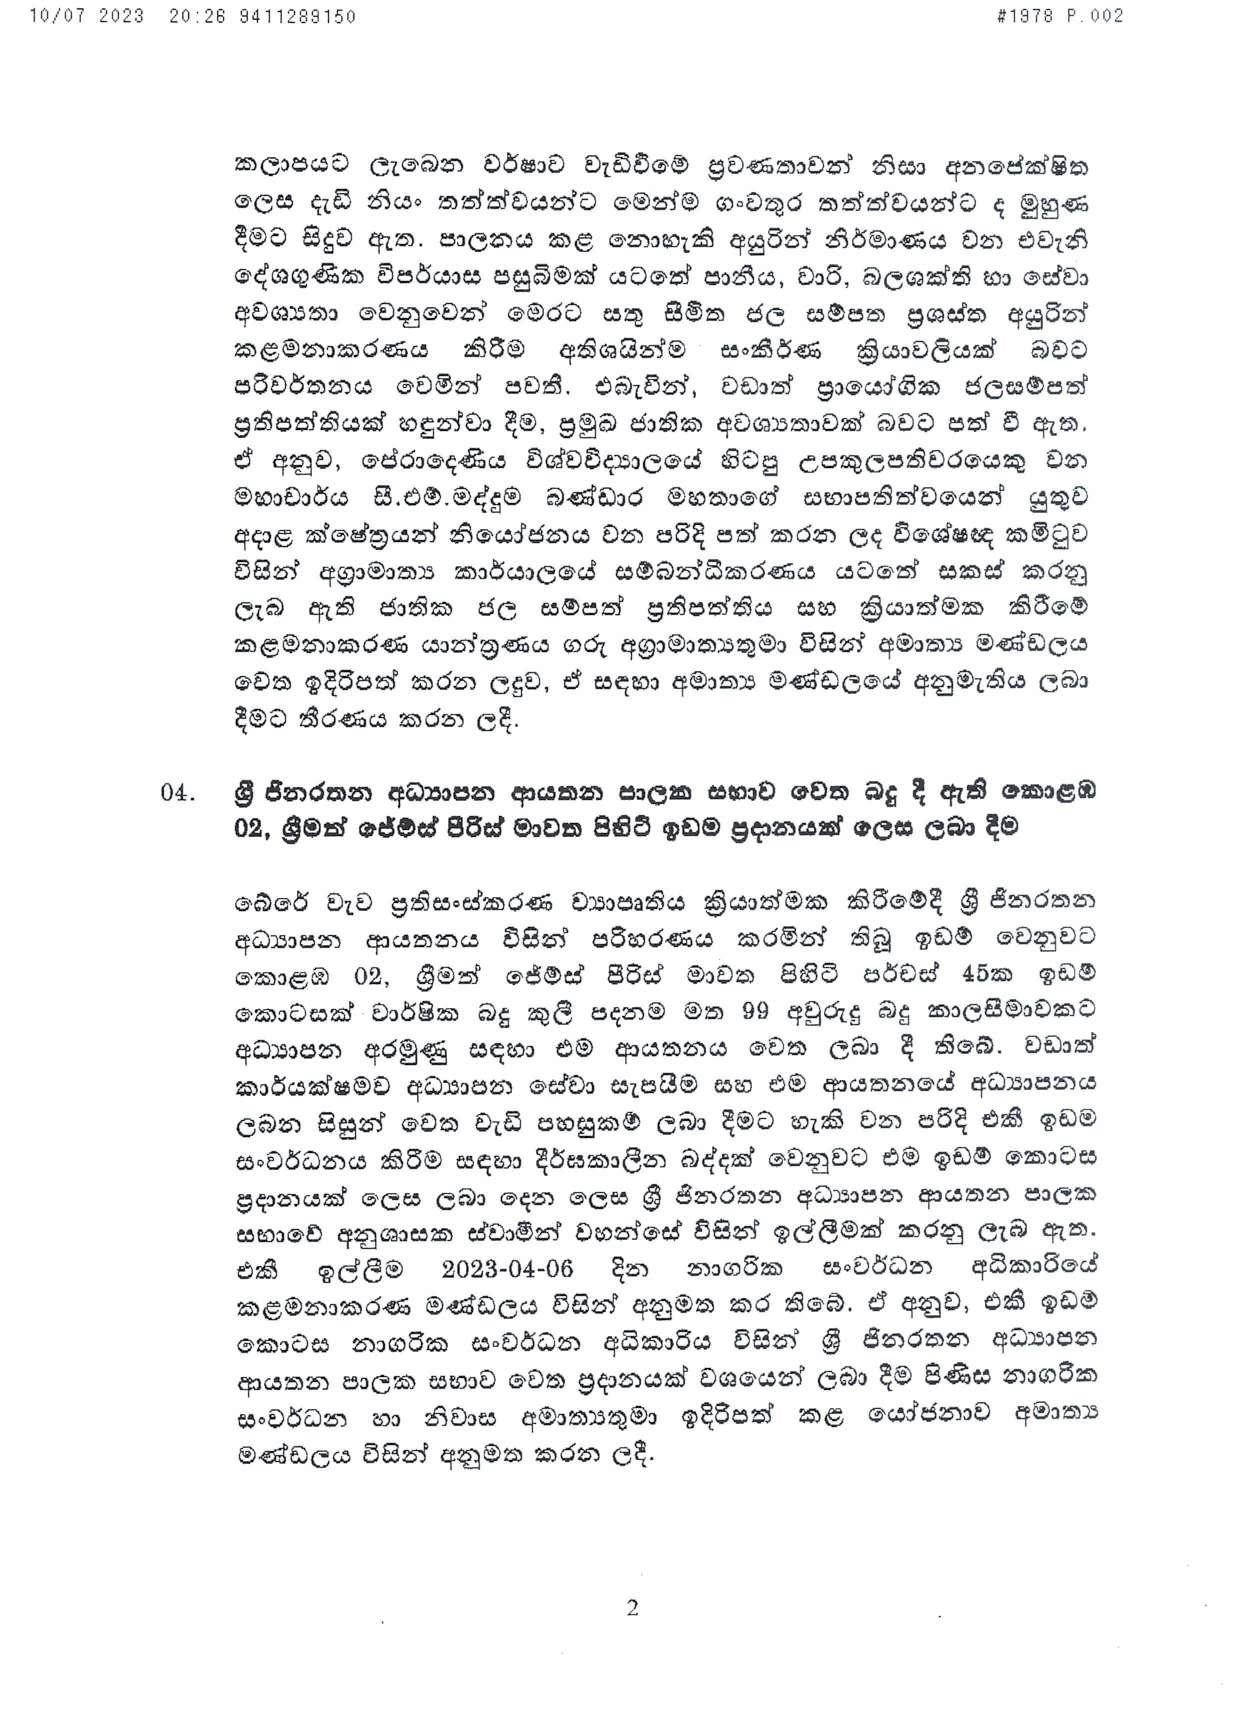 Cabinet Decision on 10.07.2023d page 002